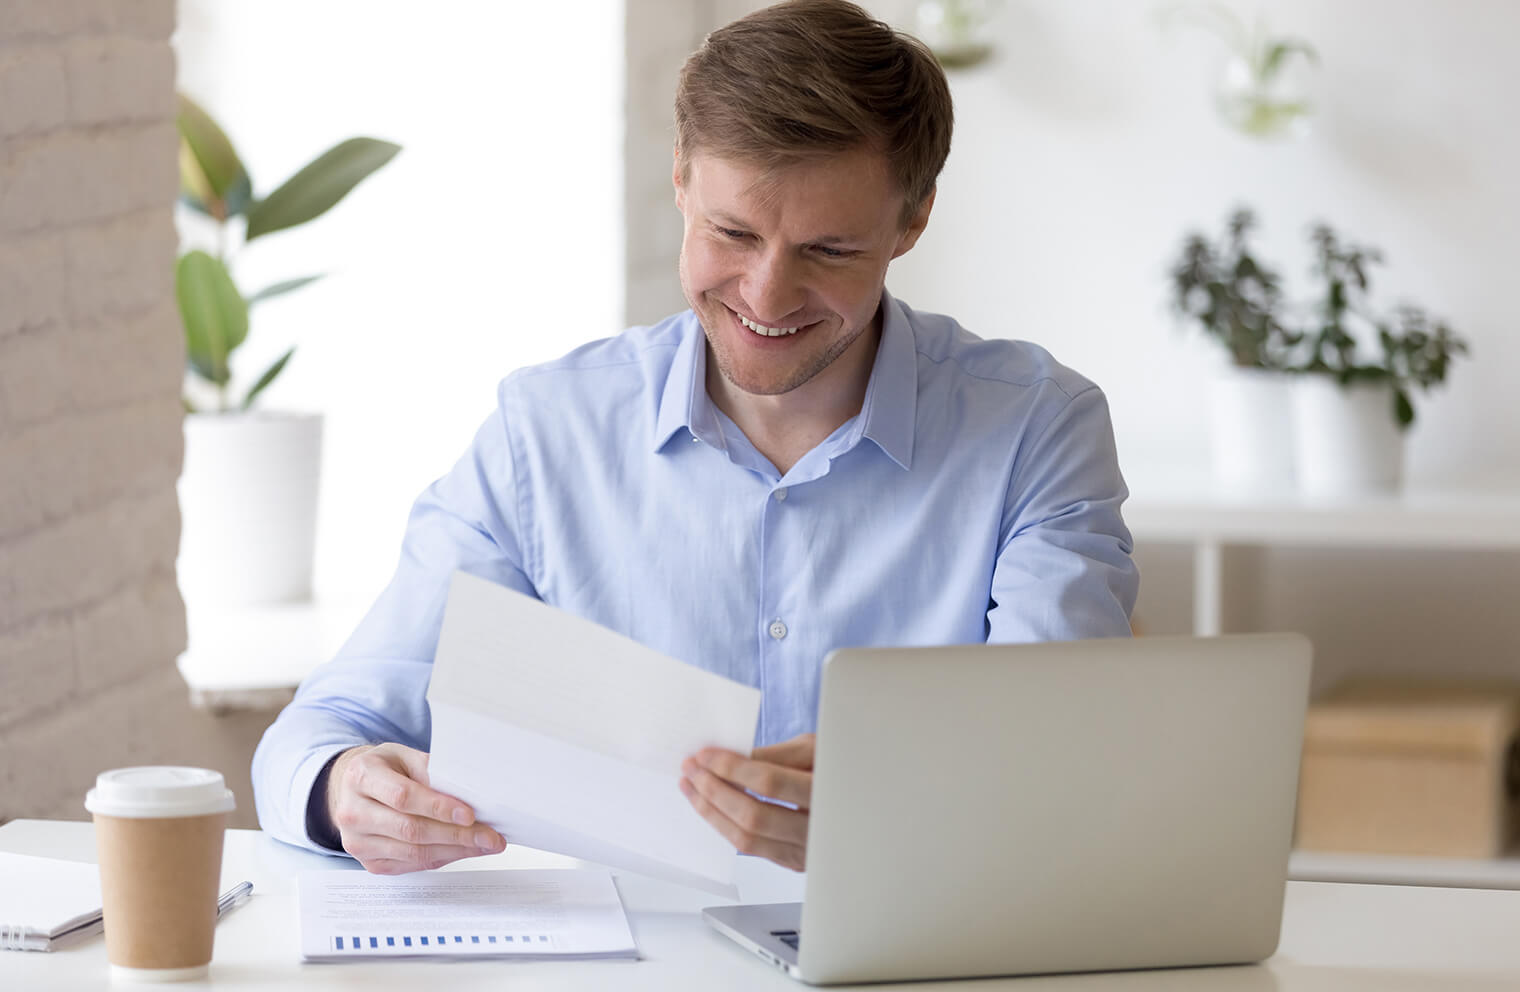 Picture of a man in a blue dress shirt, smiling and holding a piece of paper. He is sitting at  a white desk that has notebooks, coffee, documents, and a laptop on it.